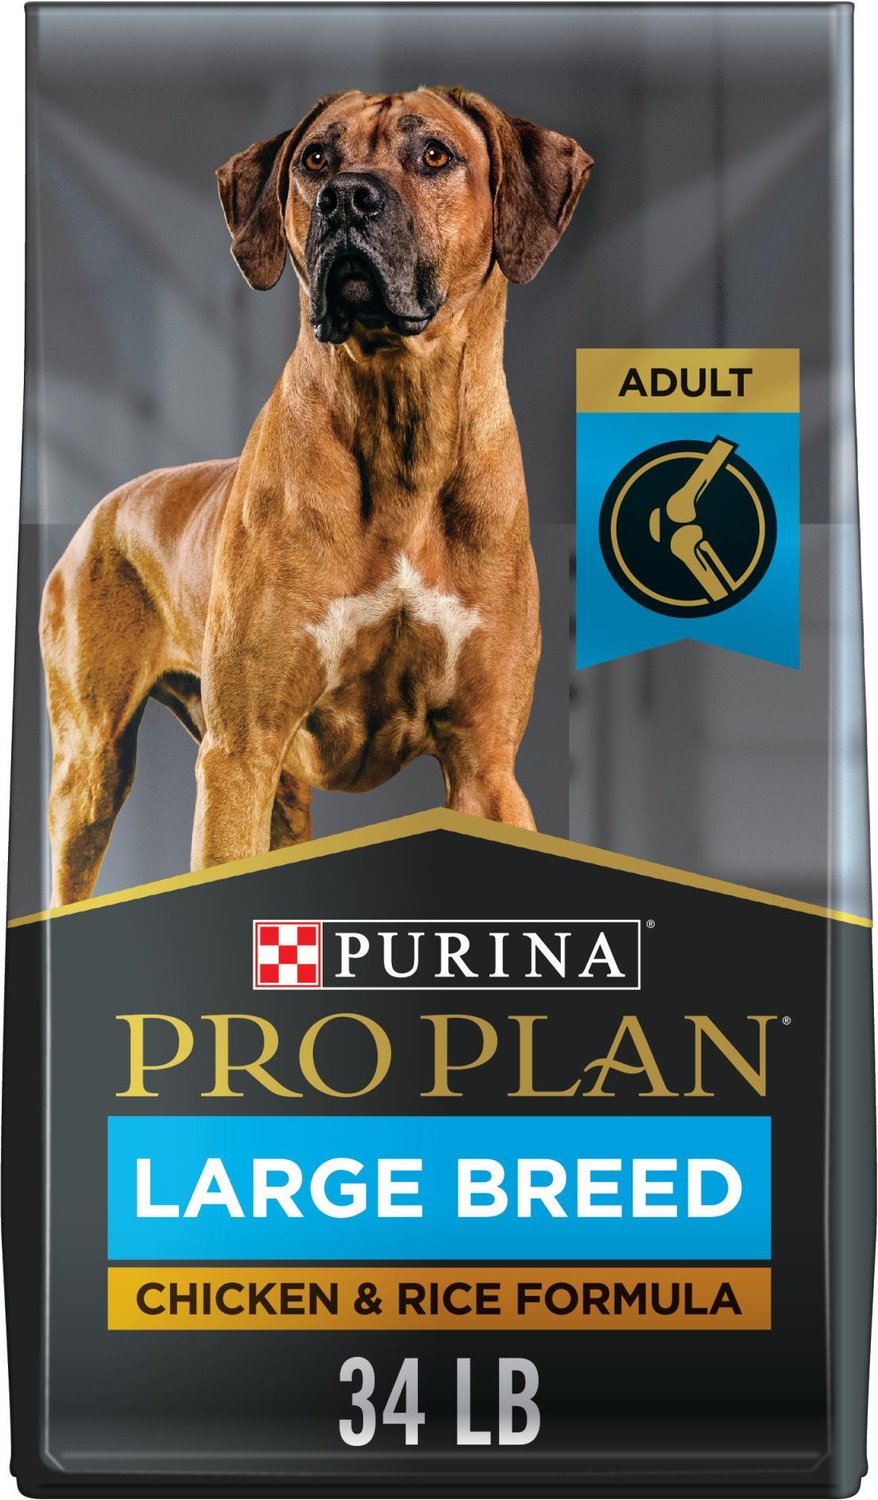 PURINA PRO PLAN Adult Large Breed 